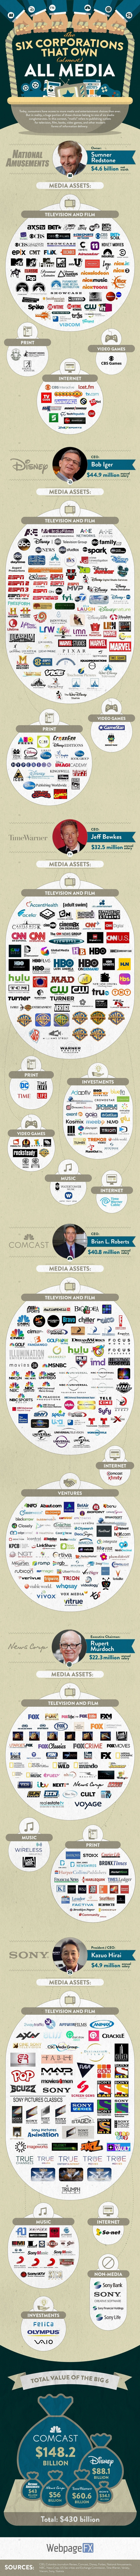 The 6 Companies That Own (almost) All Media by WebpageFX